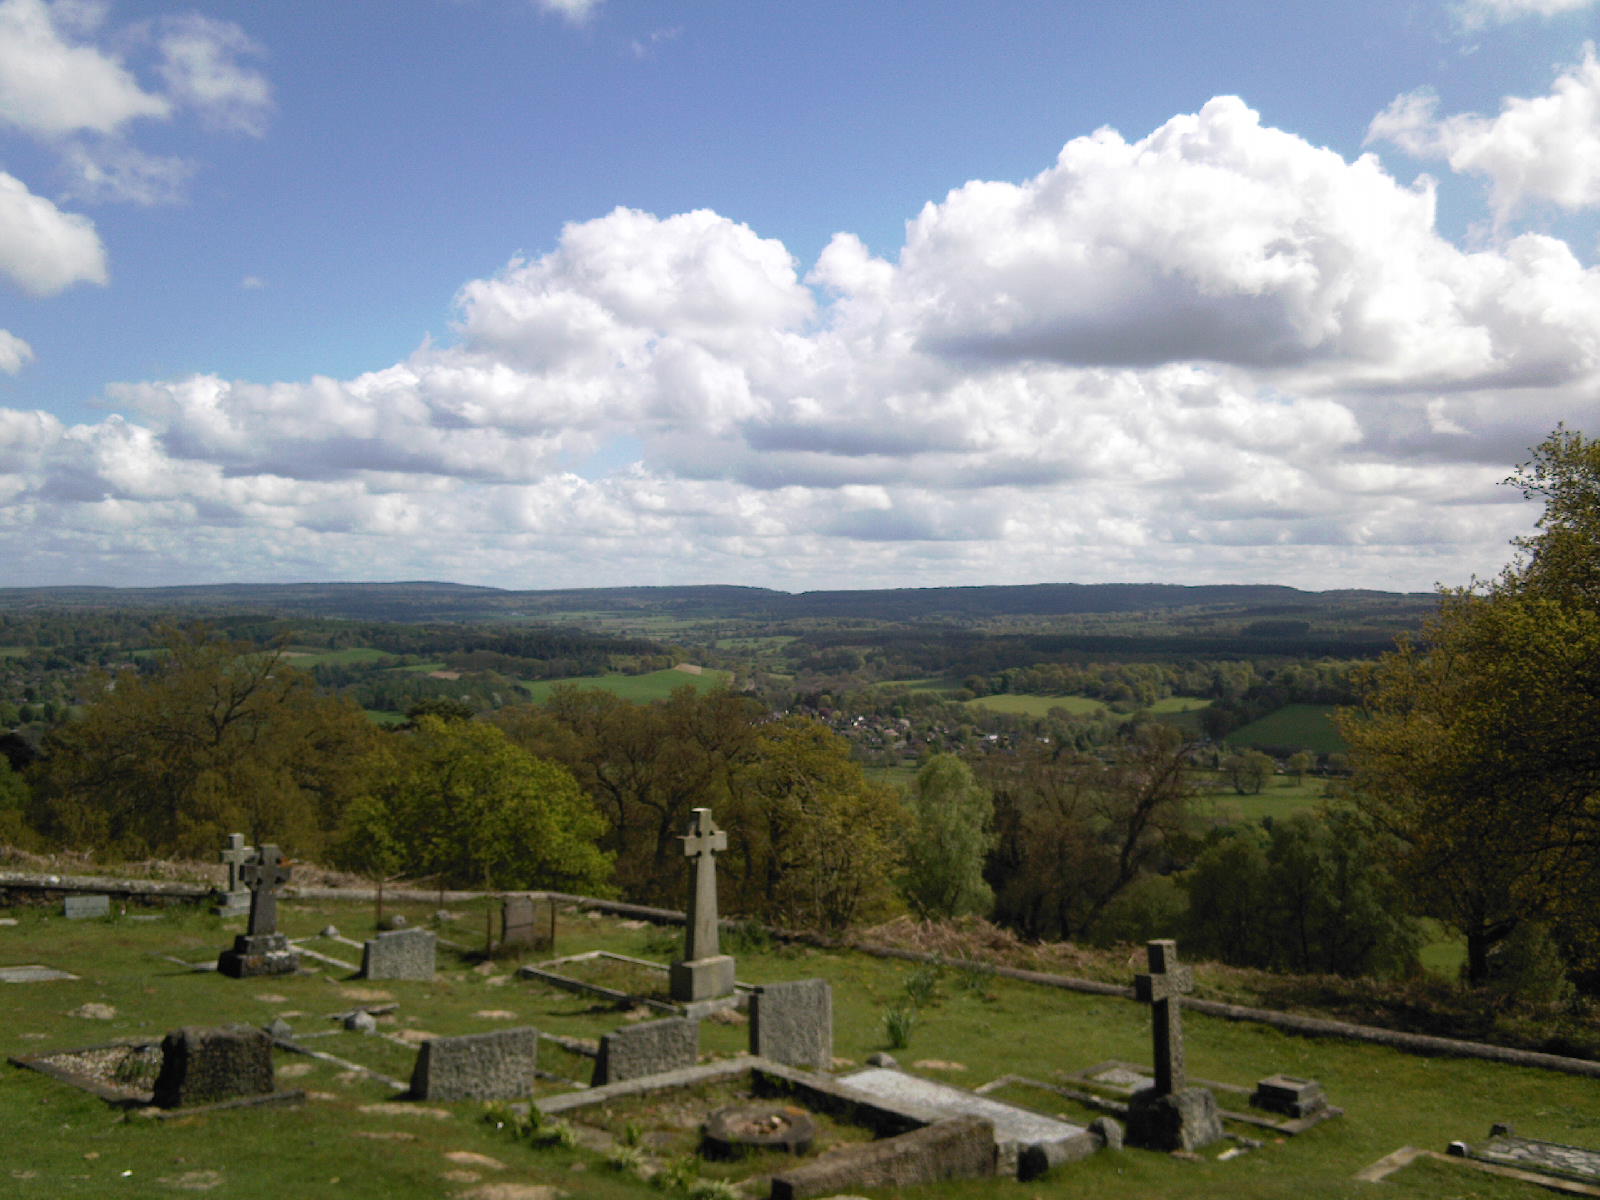 A rural graveyard in the foreground with a vista across the North Downs in Surrey, showing hills, fields and woods under a bright partly cloudy sky.